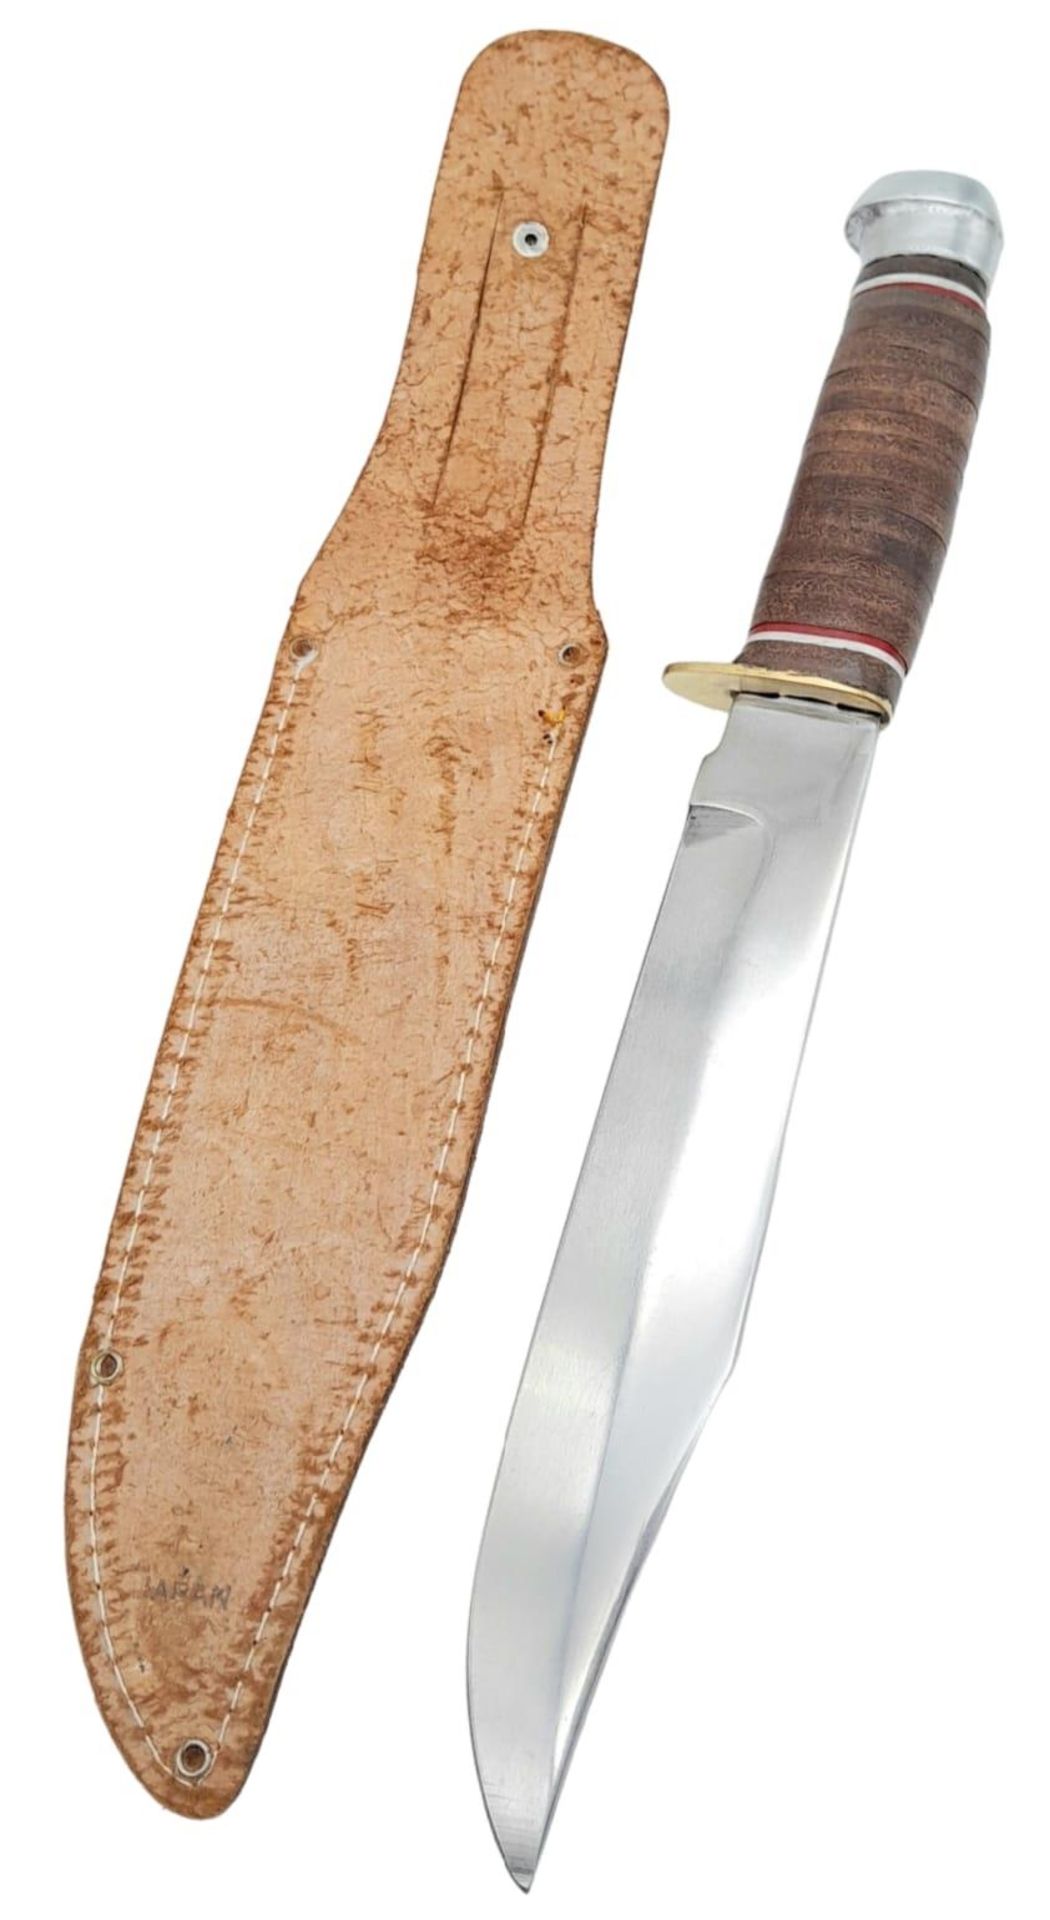 An Original Bowie Knife with high quality Japanese steel blade, leather handle and leather sheath. - Image 2 of 7